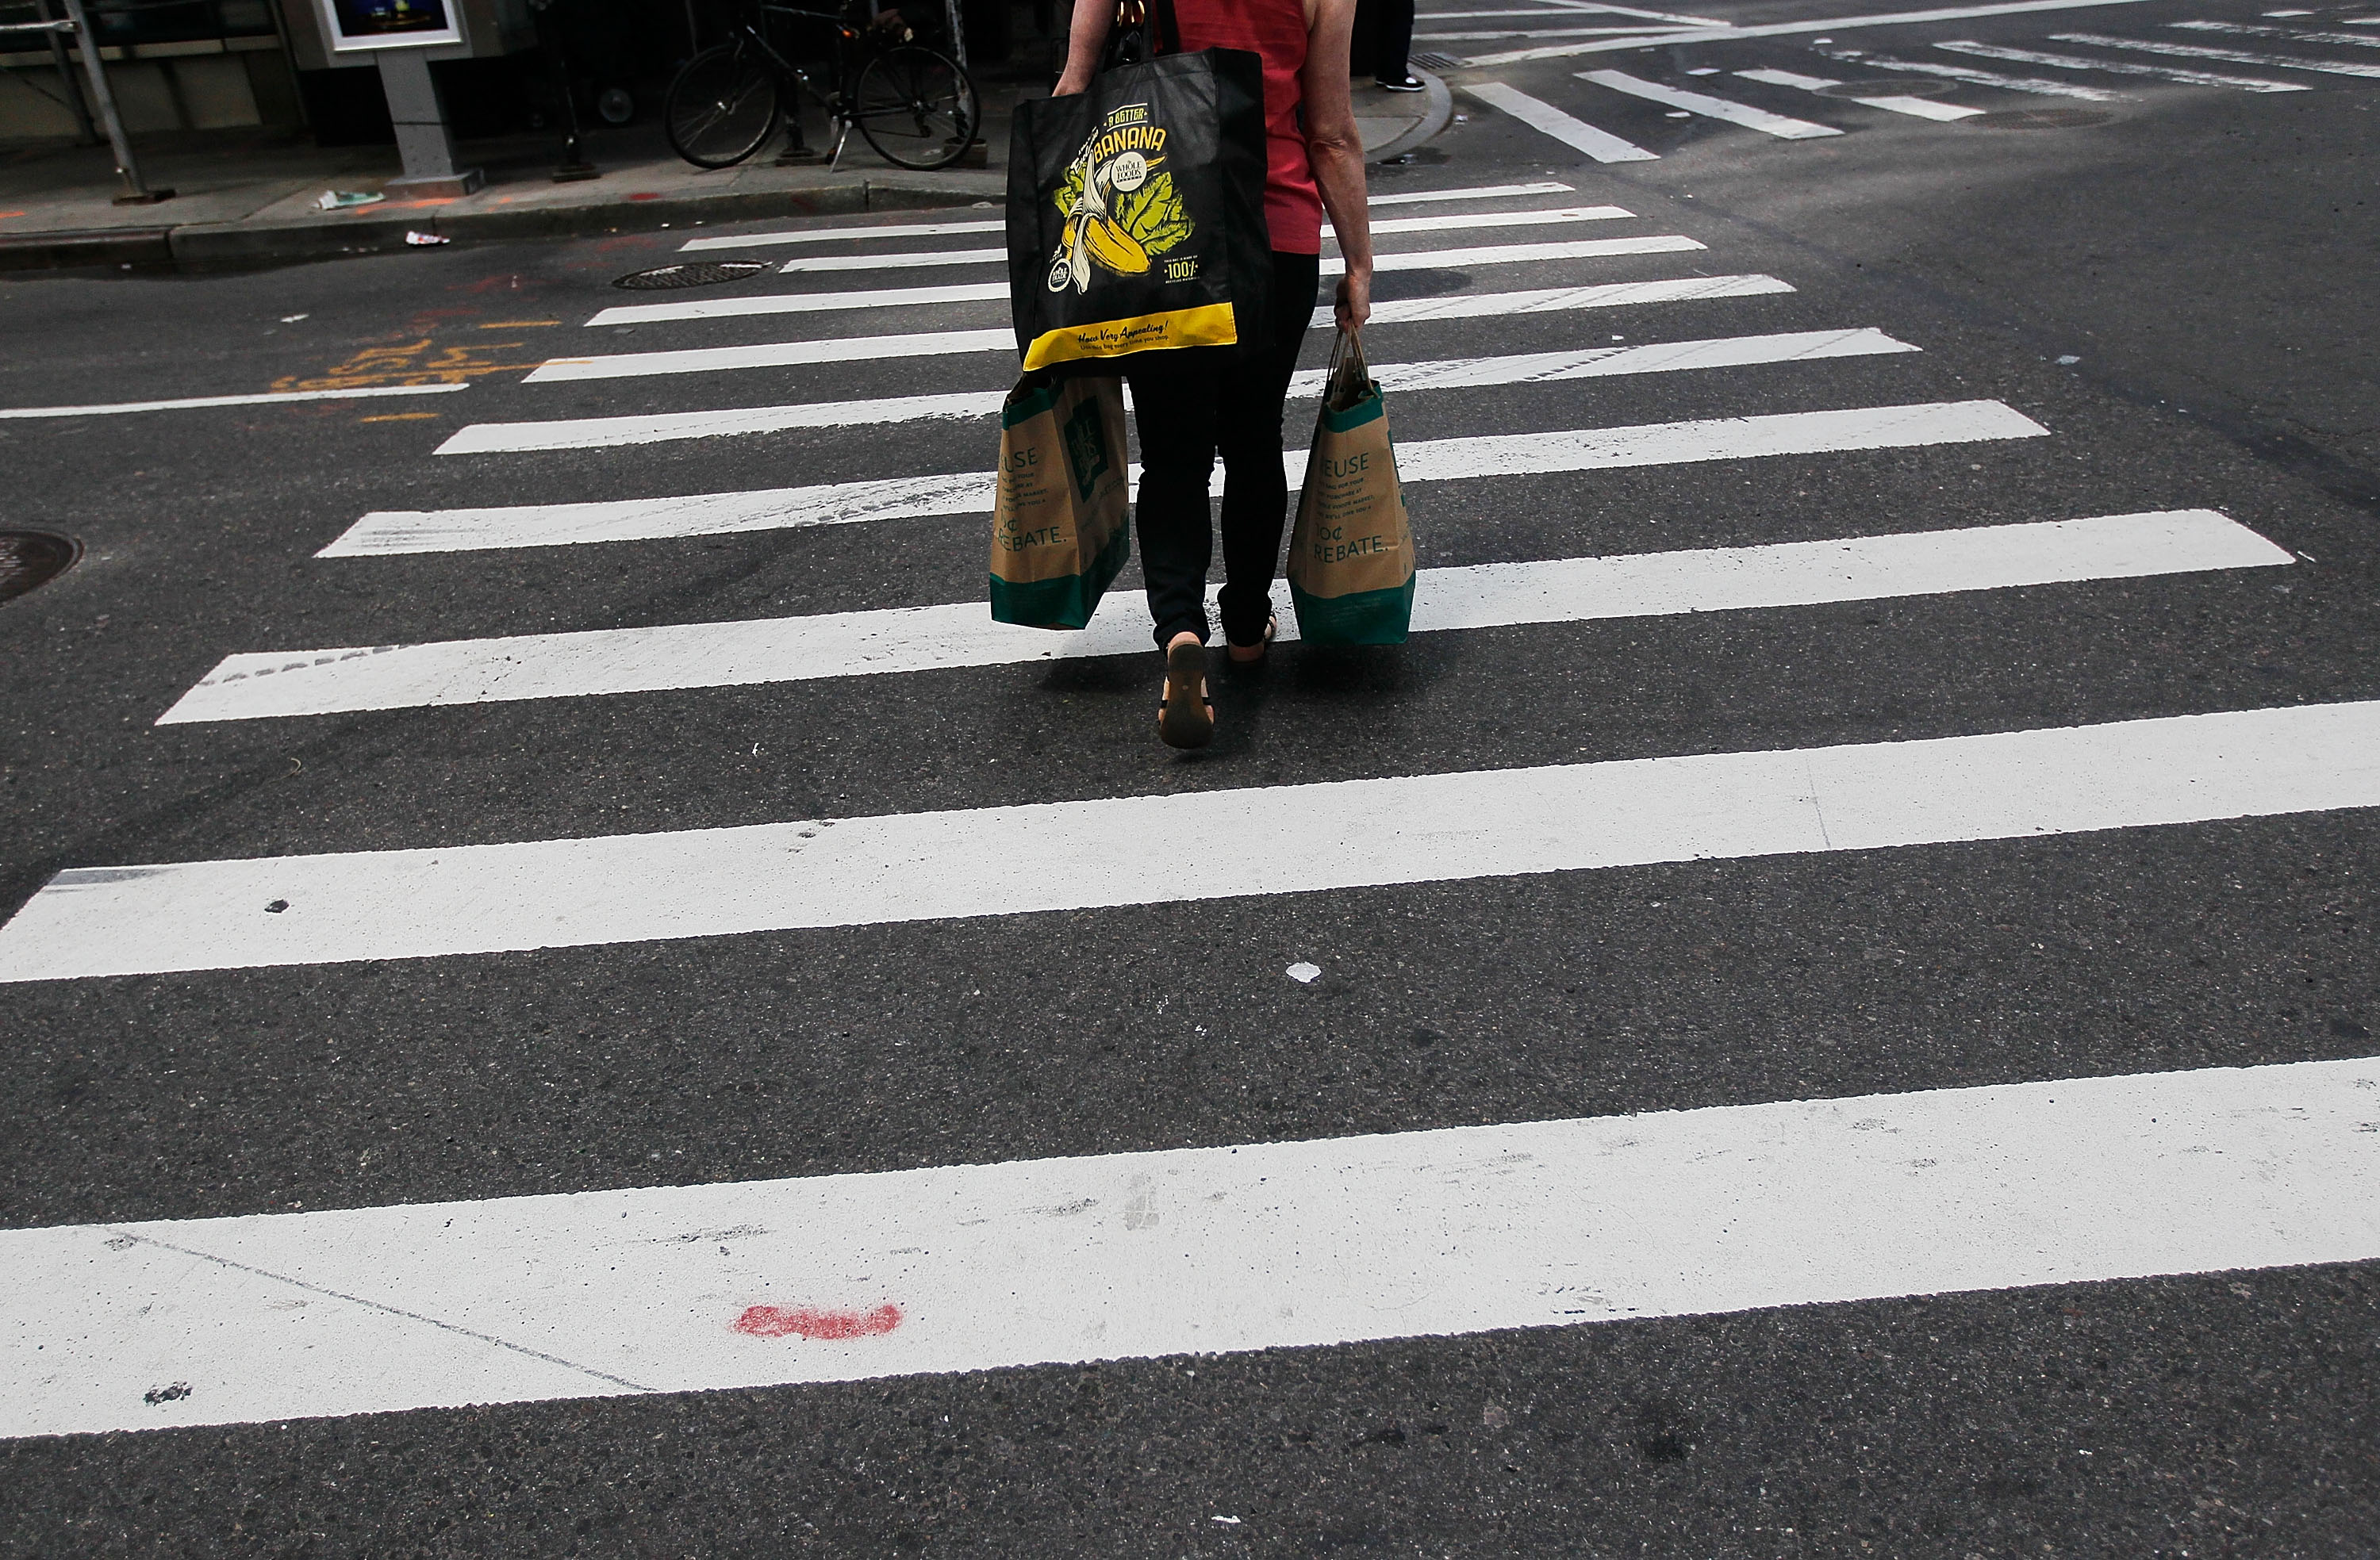 A woman with shopping bags traverses a crosswalk near Columbus Circle April 30, 2010 in New York, New York. (Chris Hondros—Getty Images)